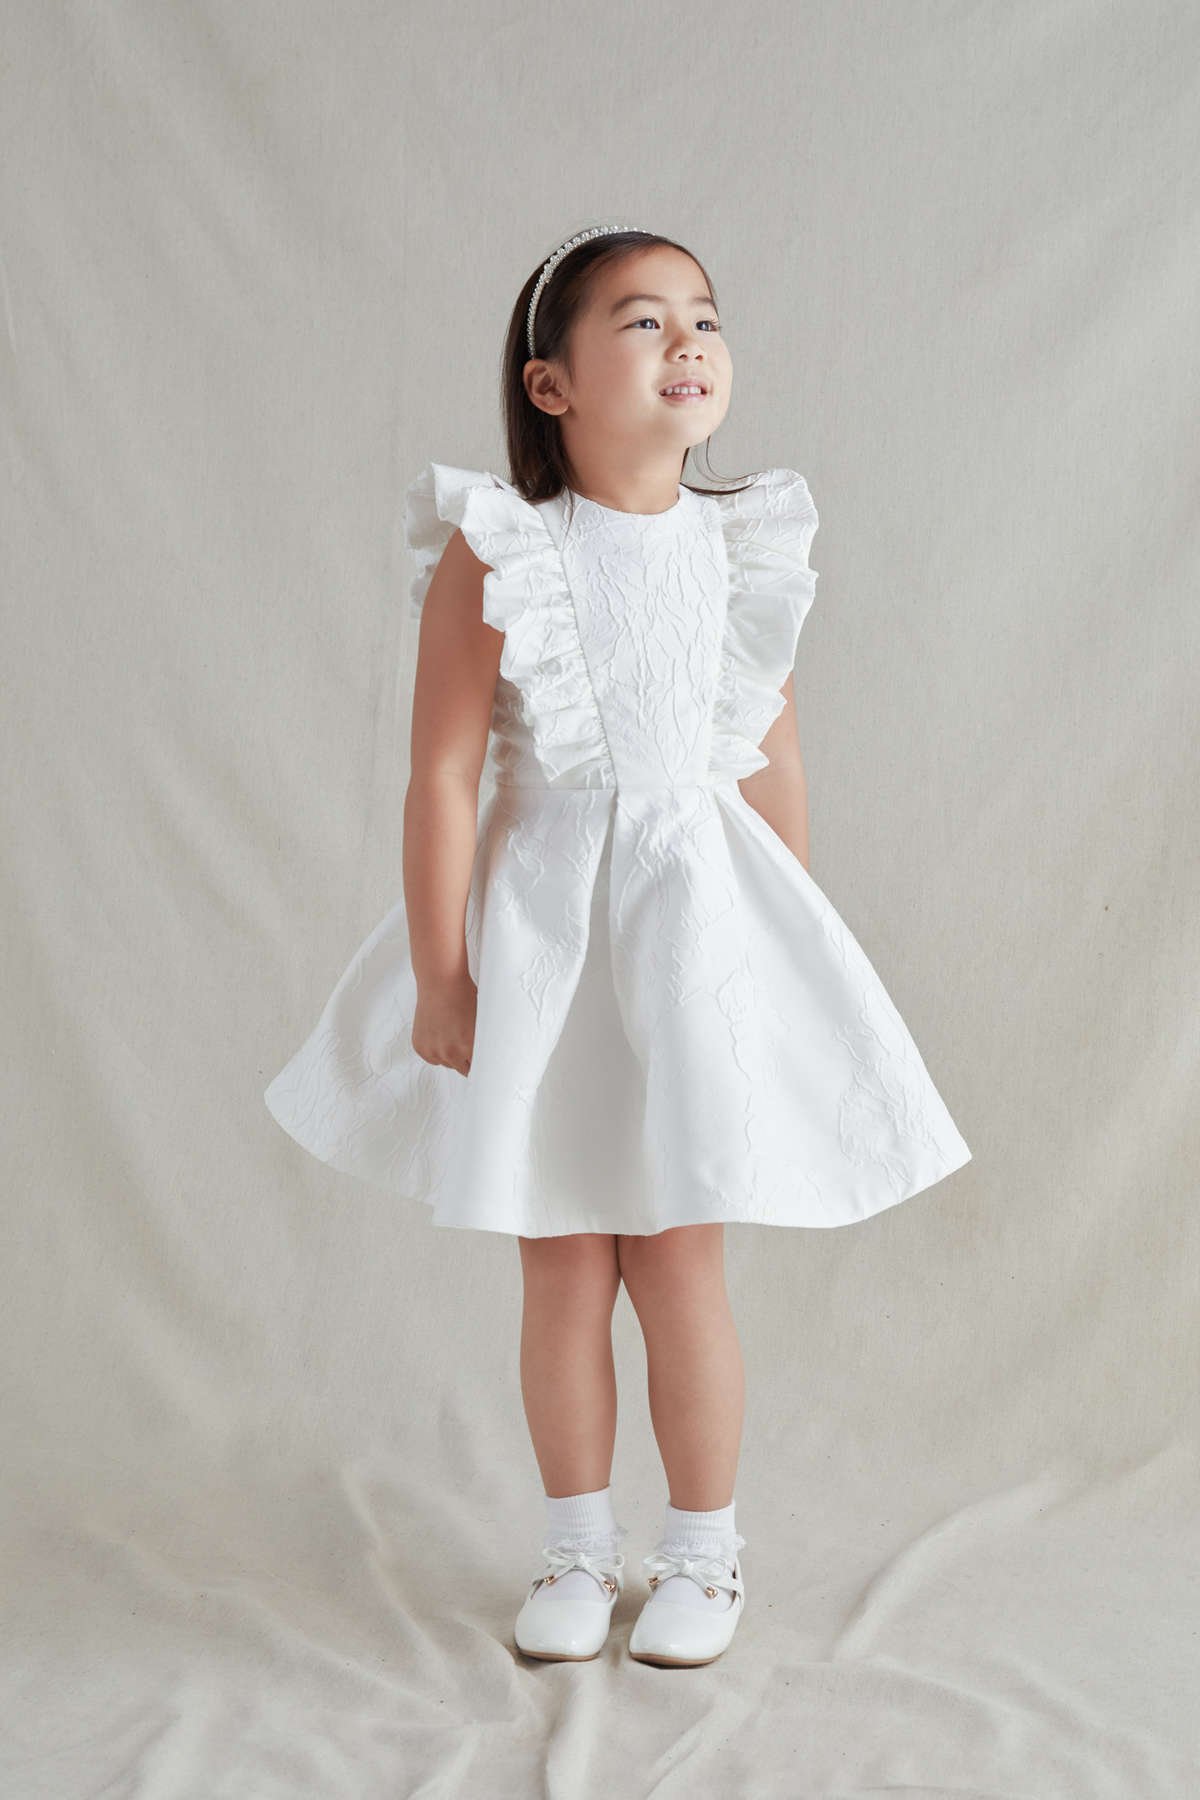 2023 Flower girl Dresses by Anne Barge to complement your Bridal Gown